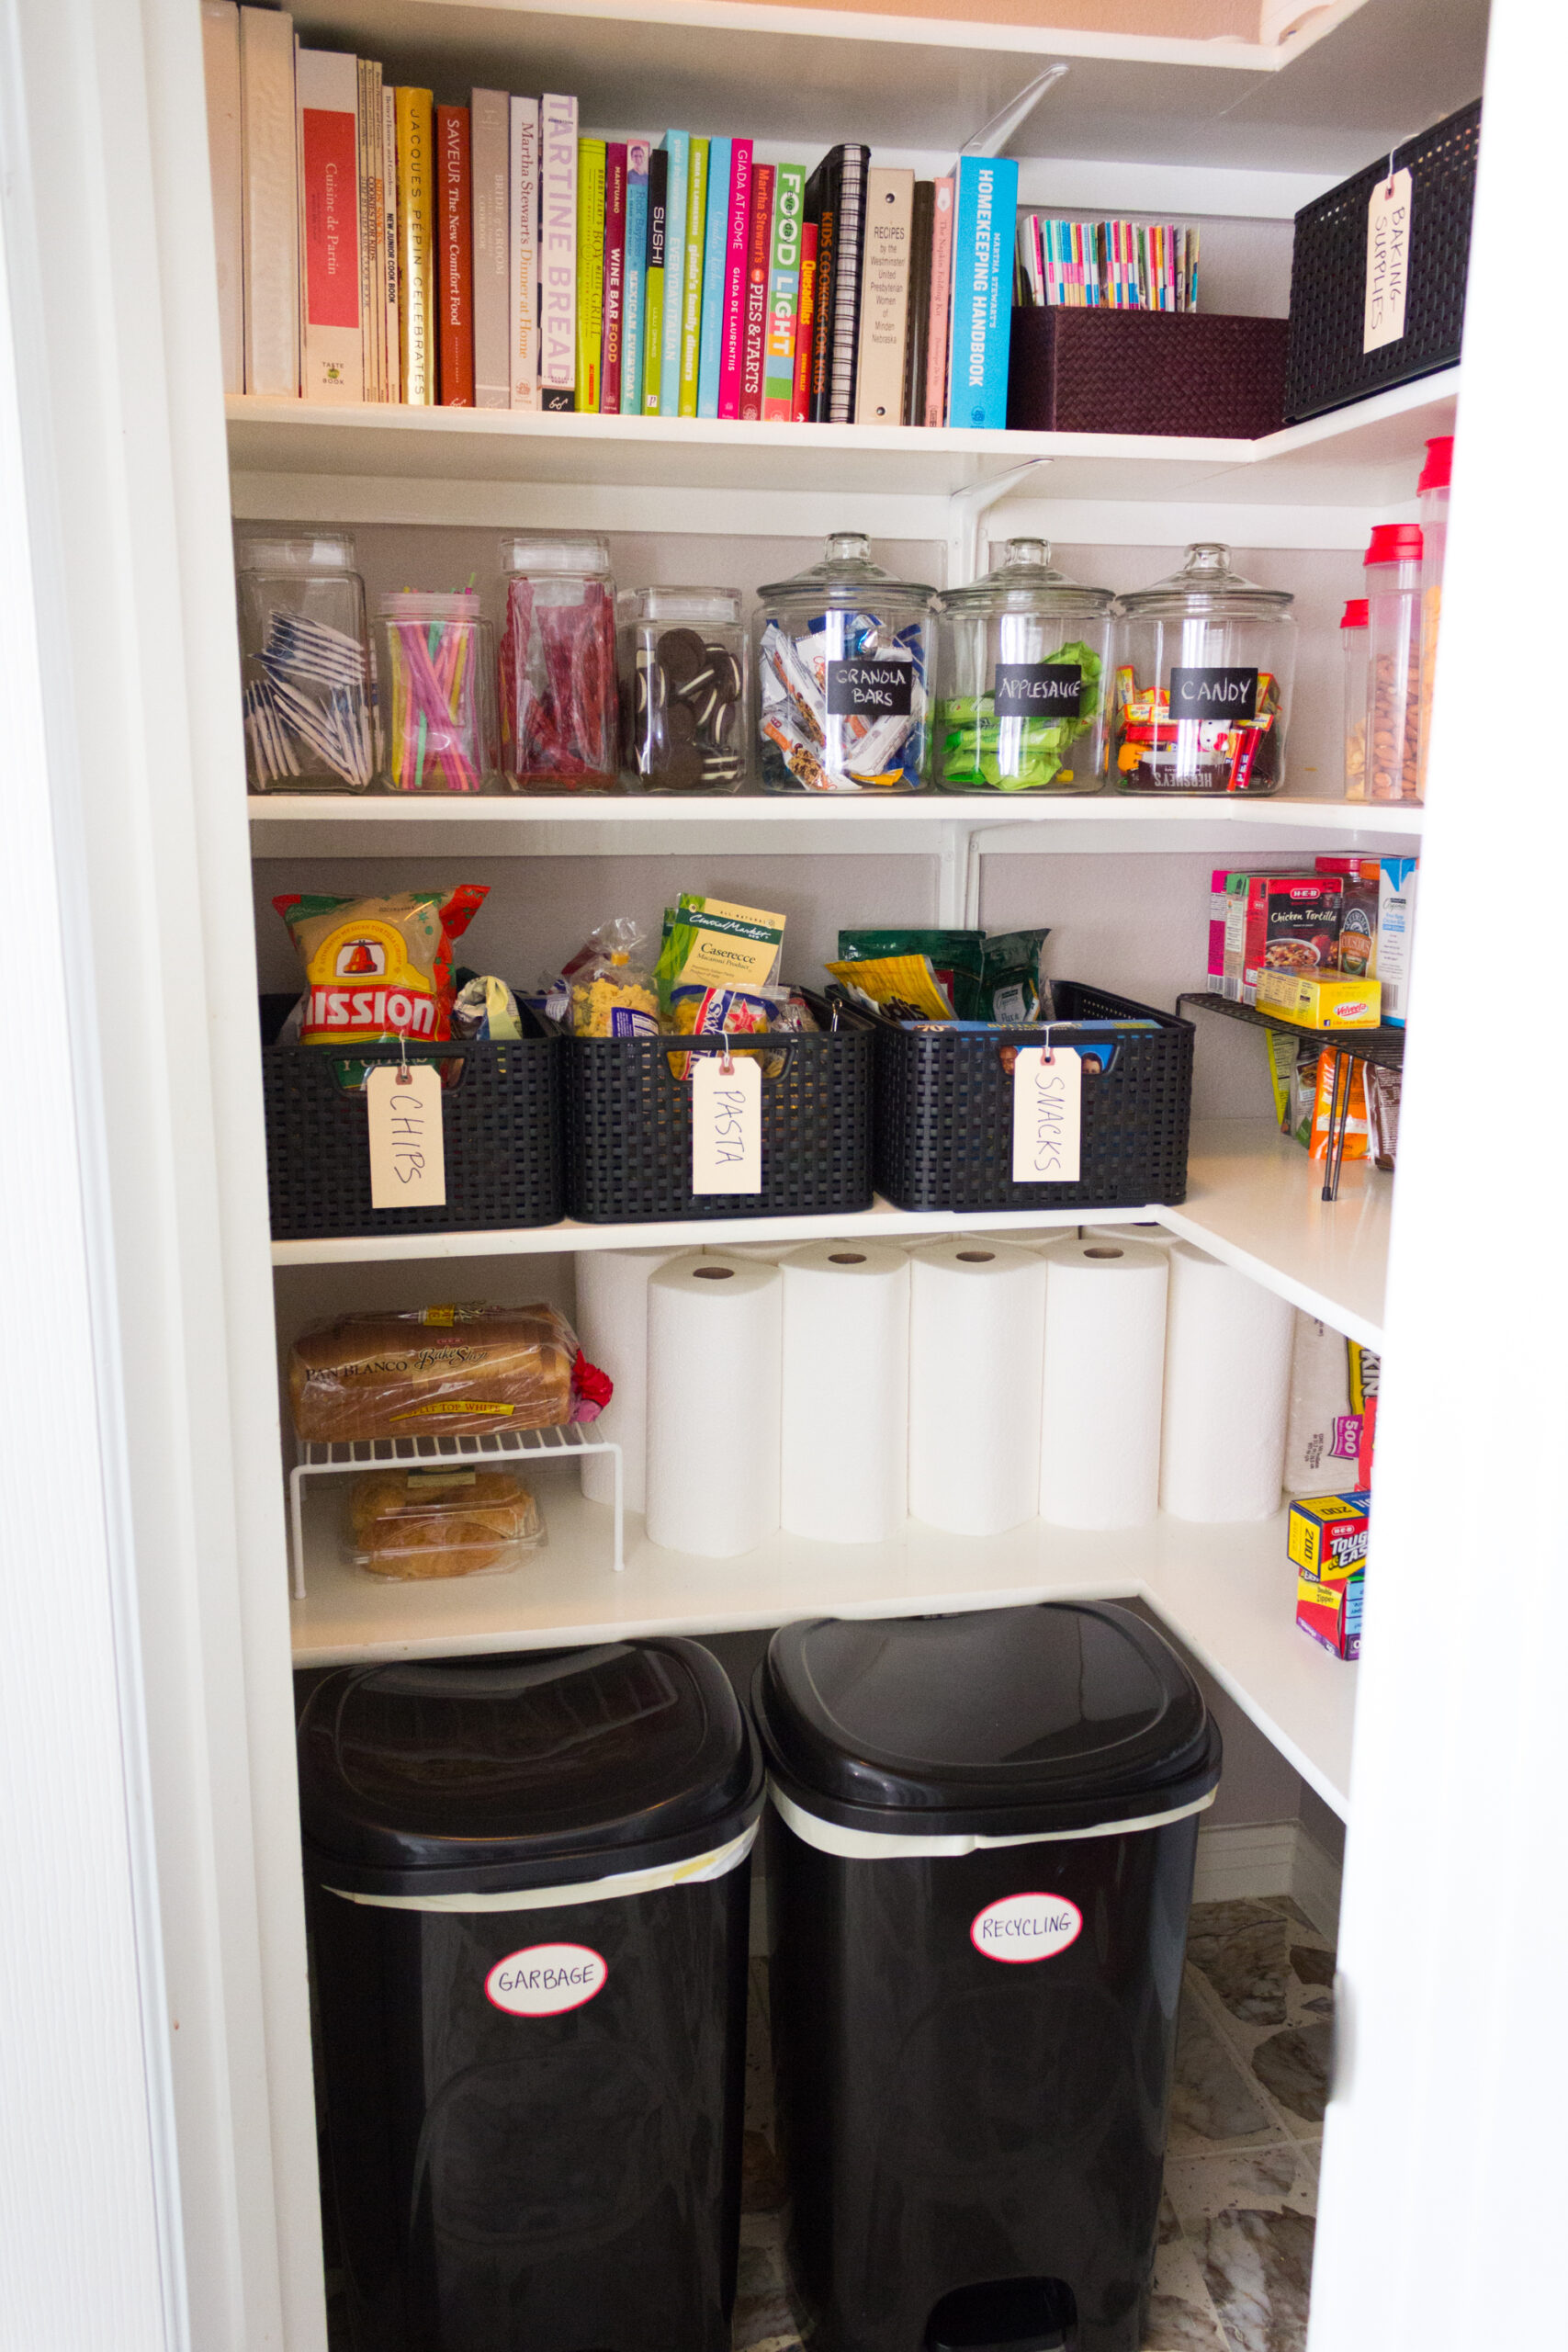 https://designimprovised.com/wp-content/uploads/2022/12/how-to-organize-a-pantry-11-1-scaled.jpg